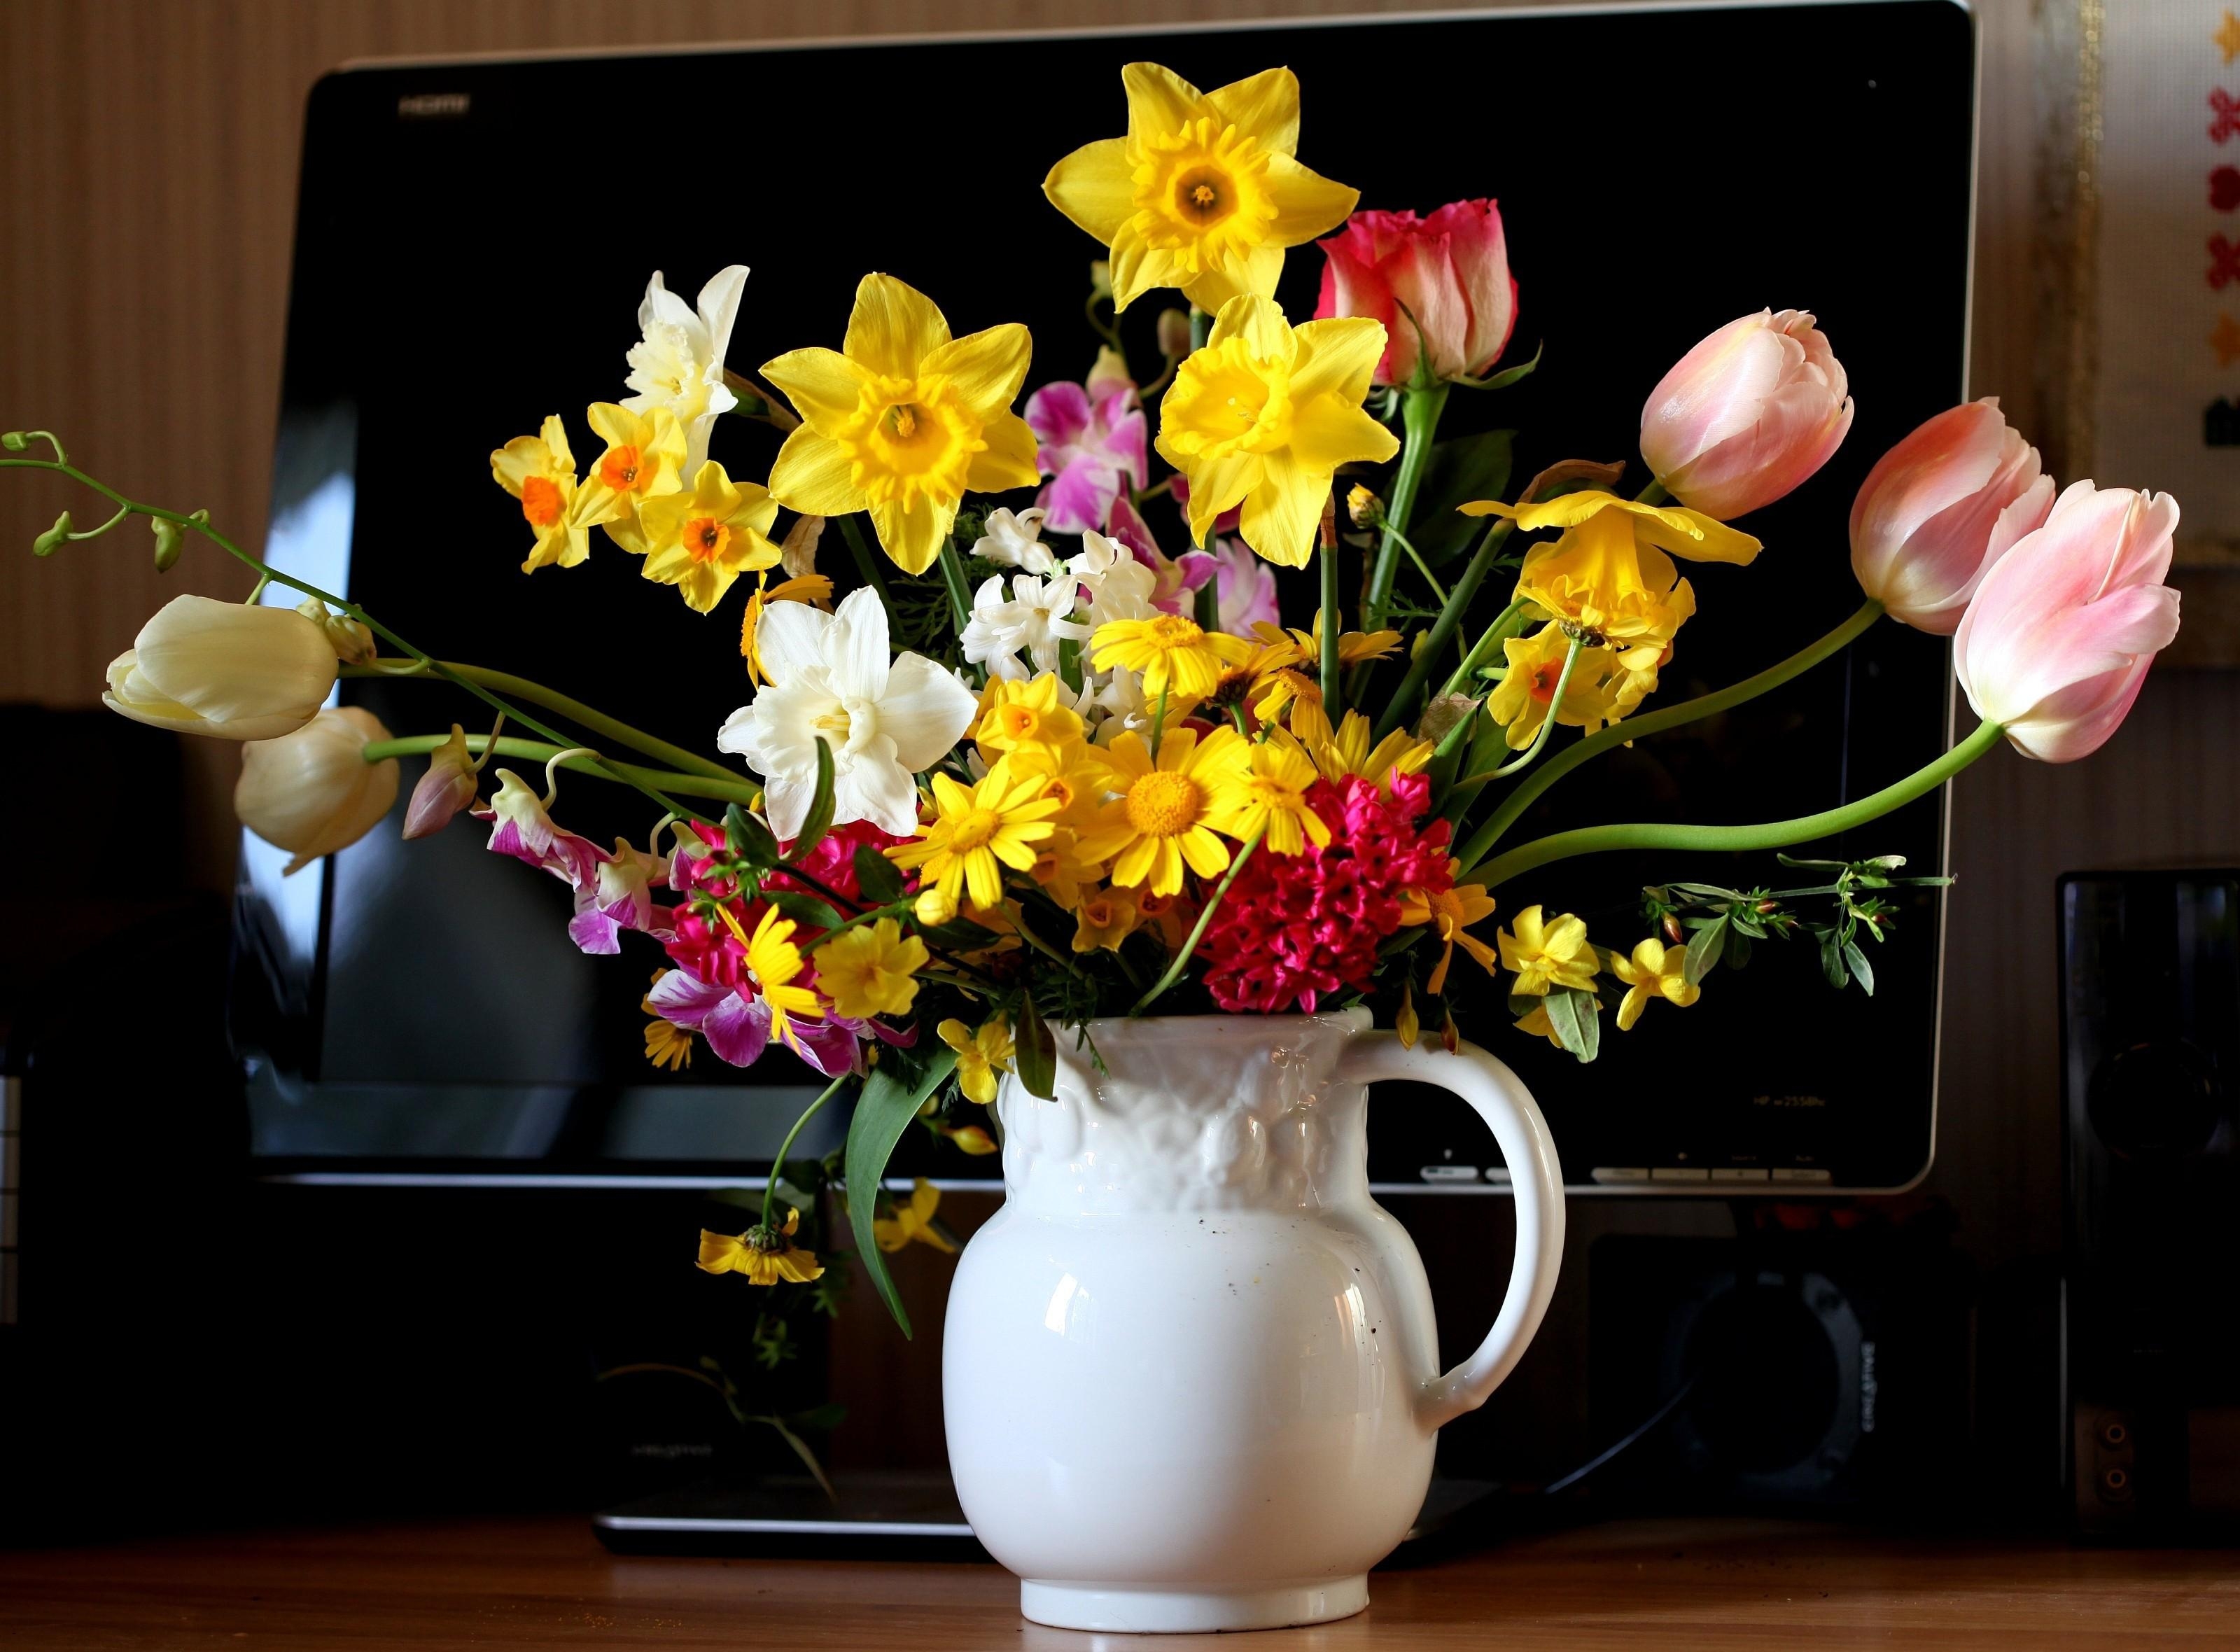 flowers, tulips, narcissussi, hyacinth, bouquet, jug, monitor